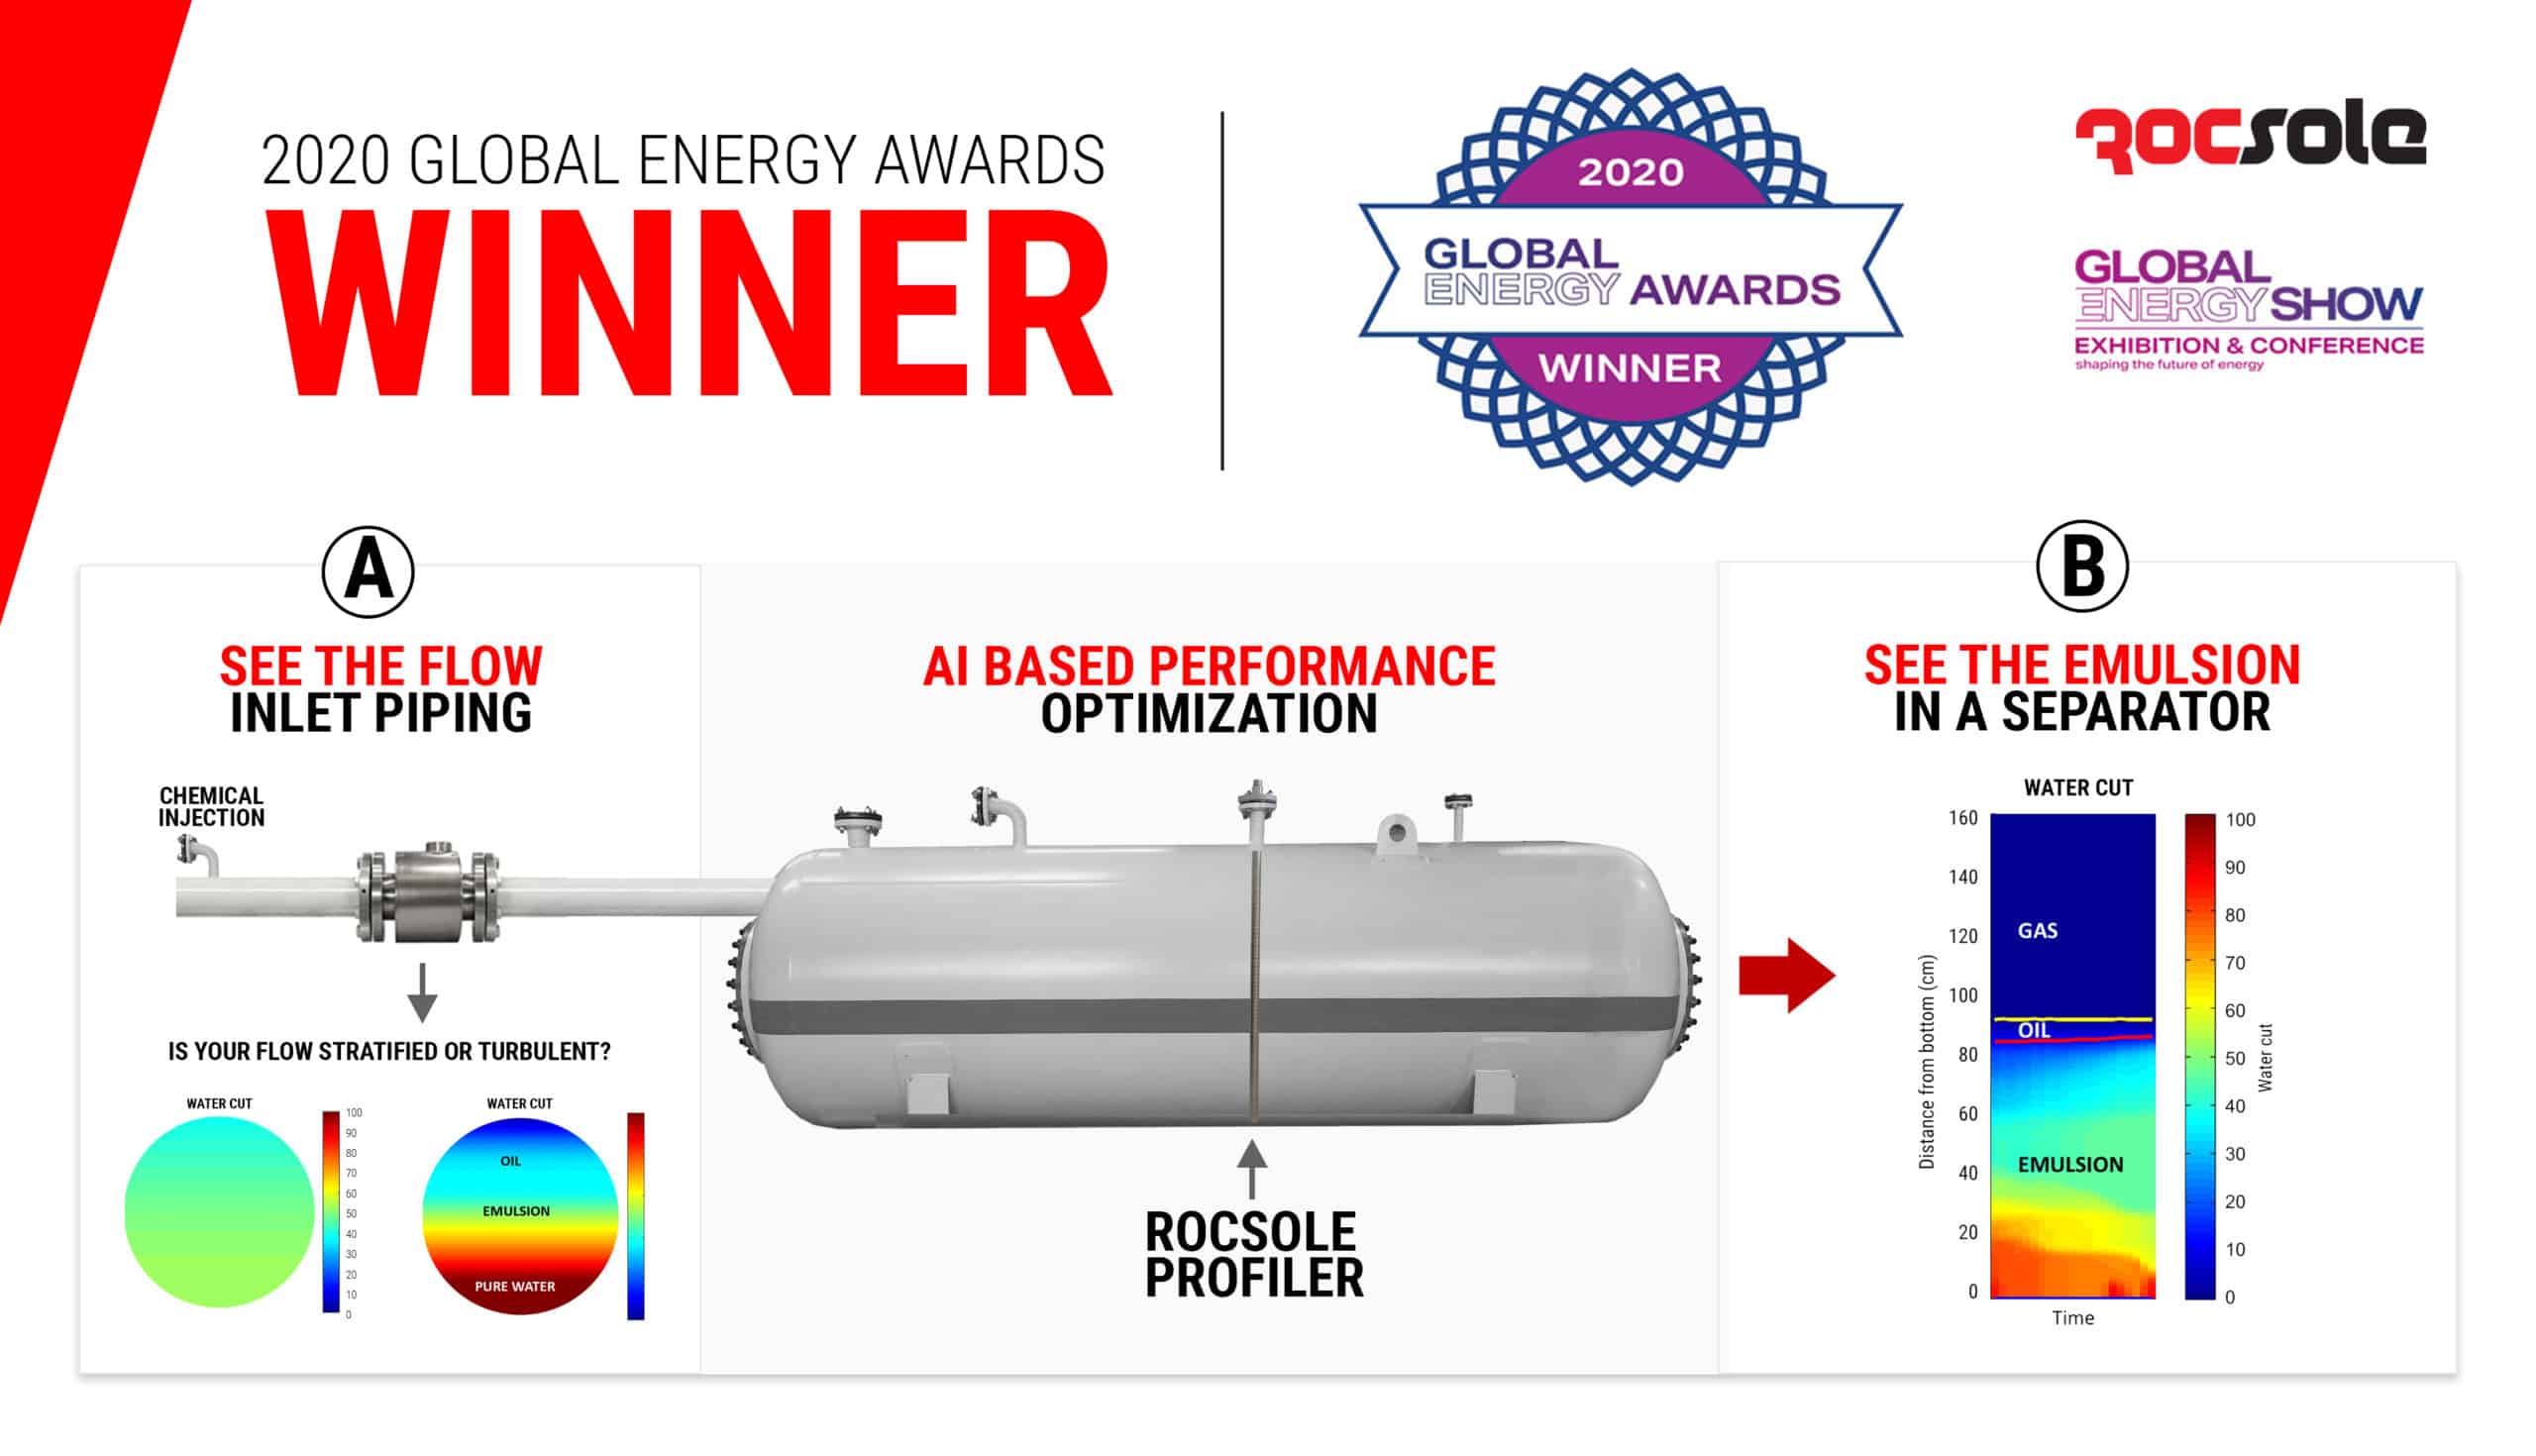 Rocsole is the Winner of the 2020 Global Energy Award for Innovation in Process Control